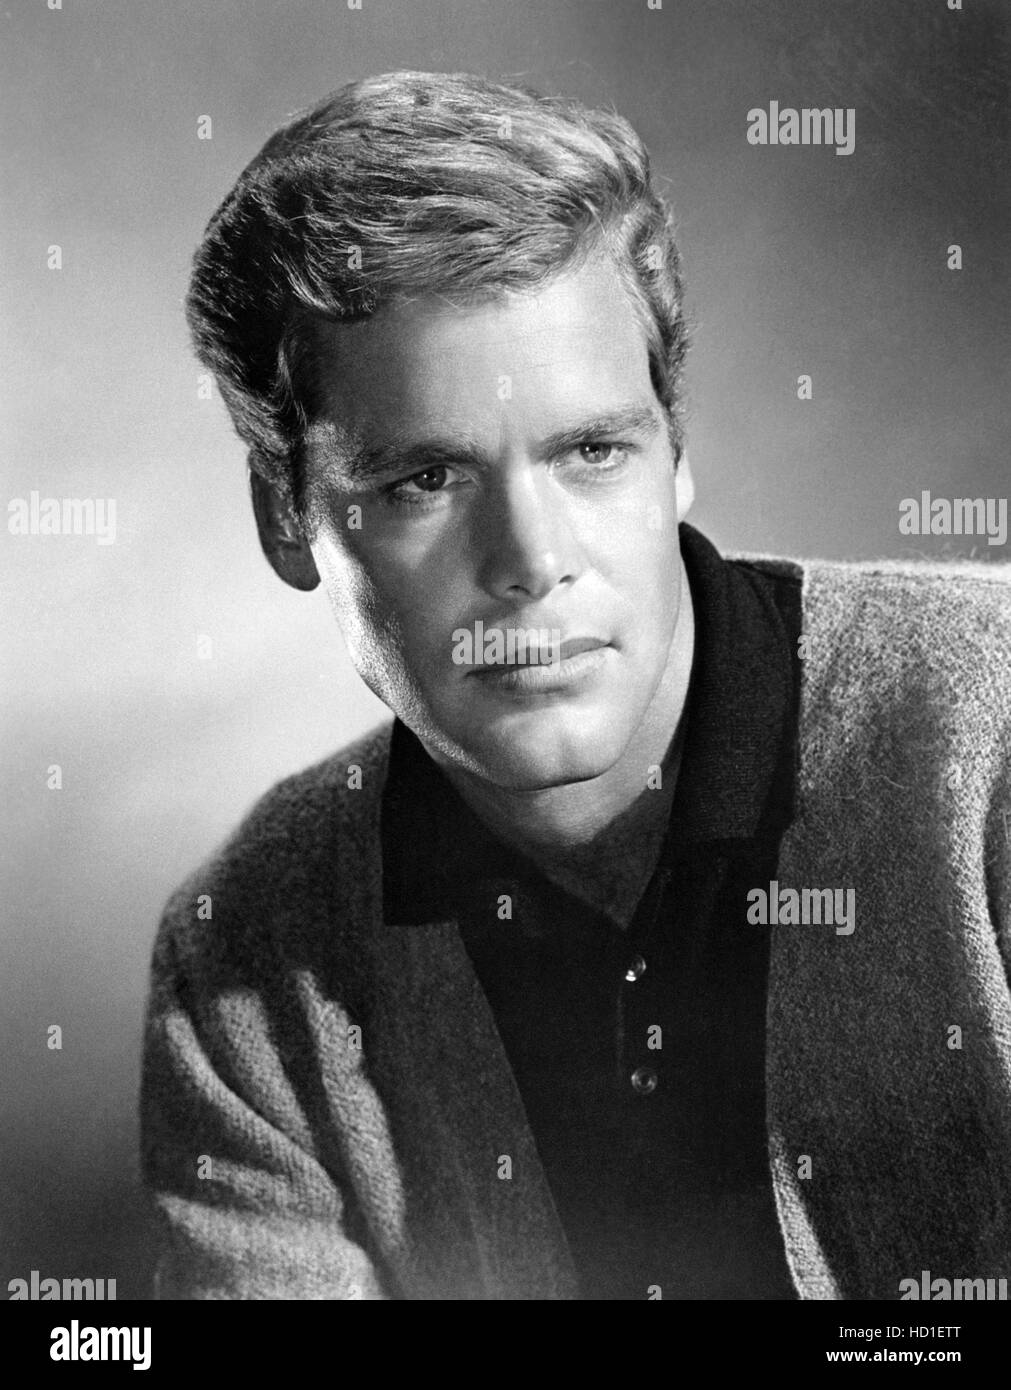 Doug McClure, Universal Pictures, ca. early 1960s Stock Photo - Alamy